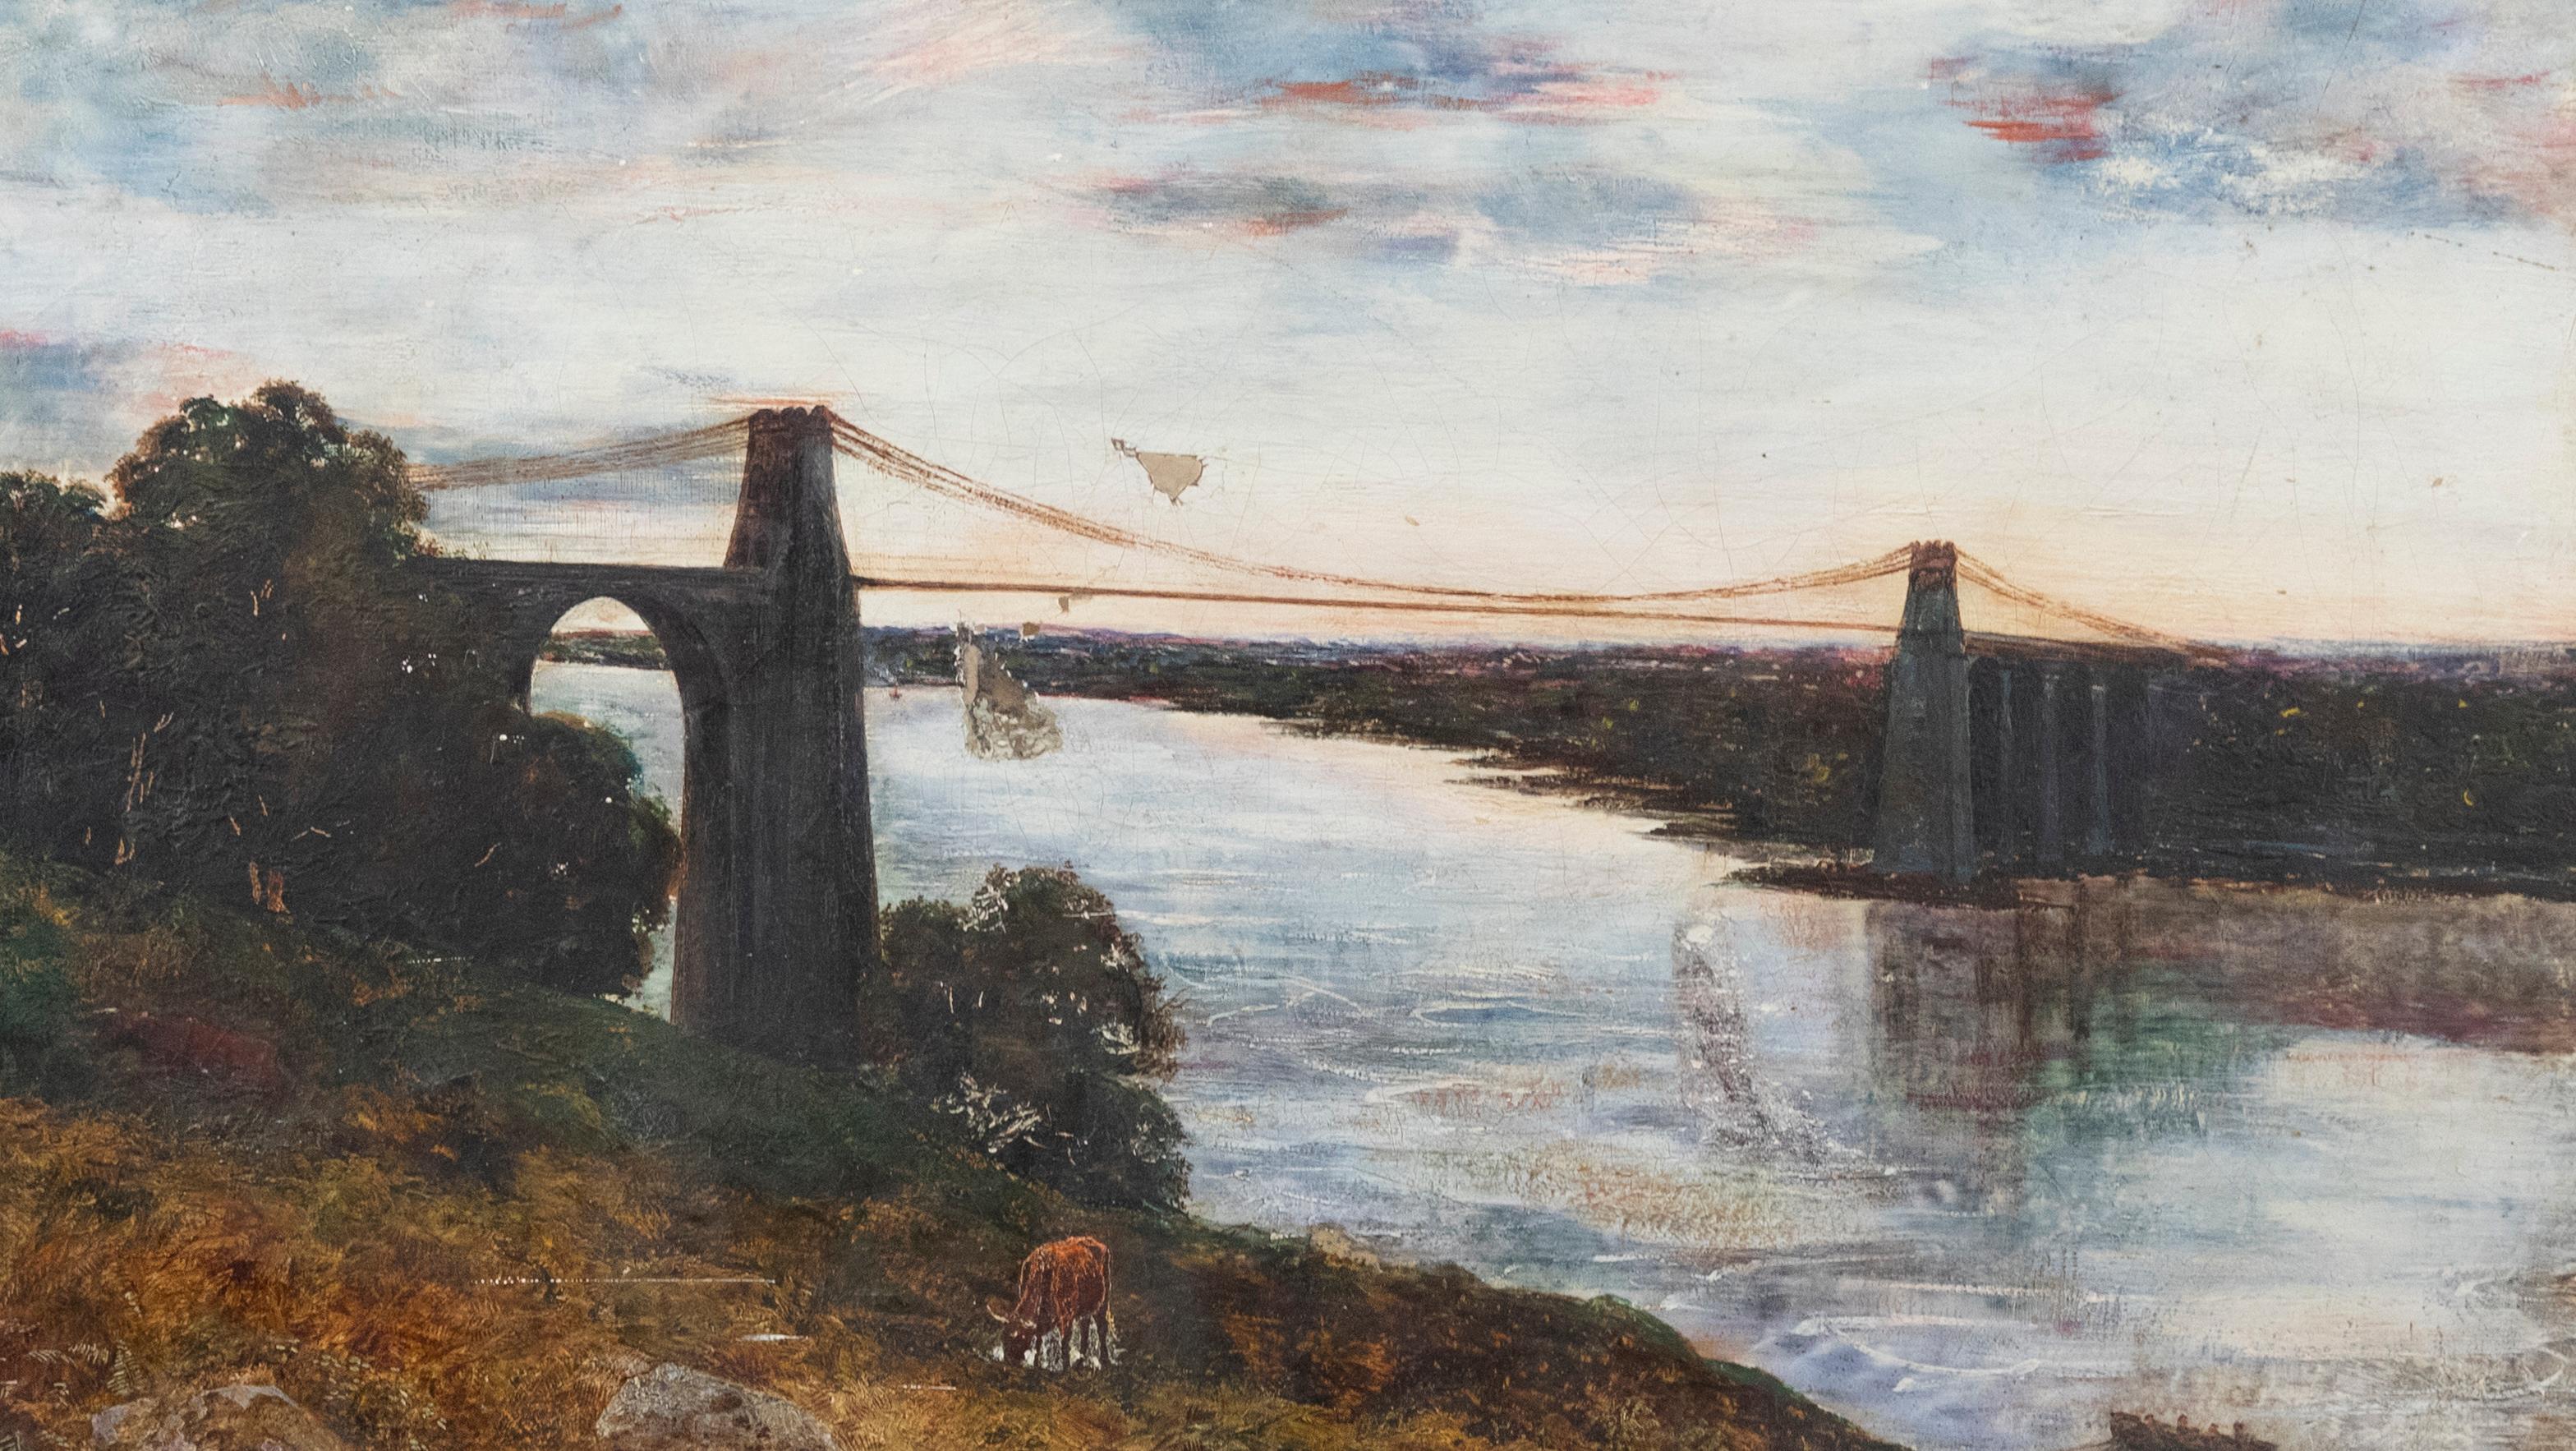 A delightful study of Menai Bridge in Anglesey, North Wales for restoration. The scene shows the iron suspension bridge in the idyllic North Wales landscape with a cow grazing in the foreground. Title, artist name and date inscribed to label verso.